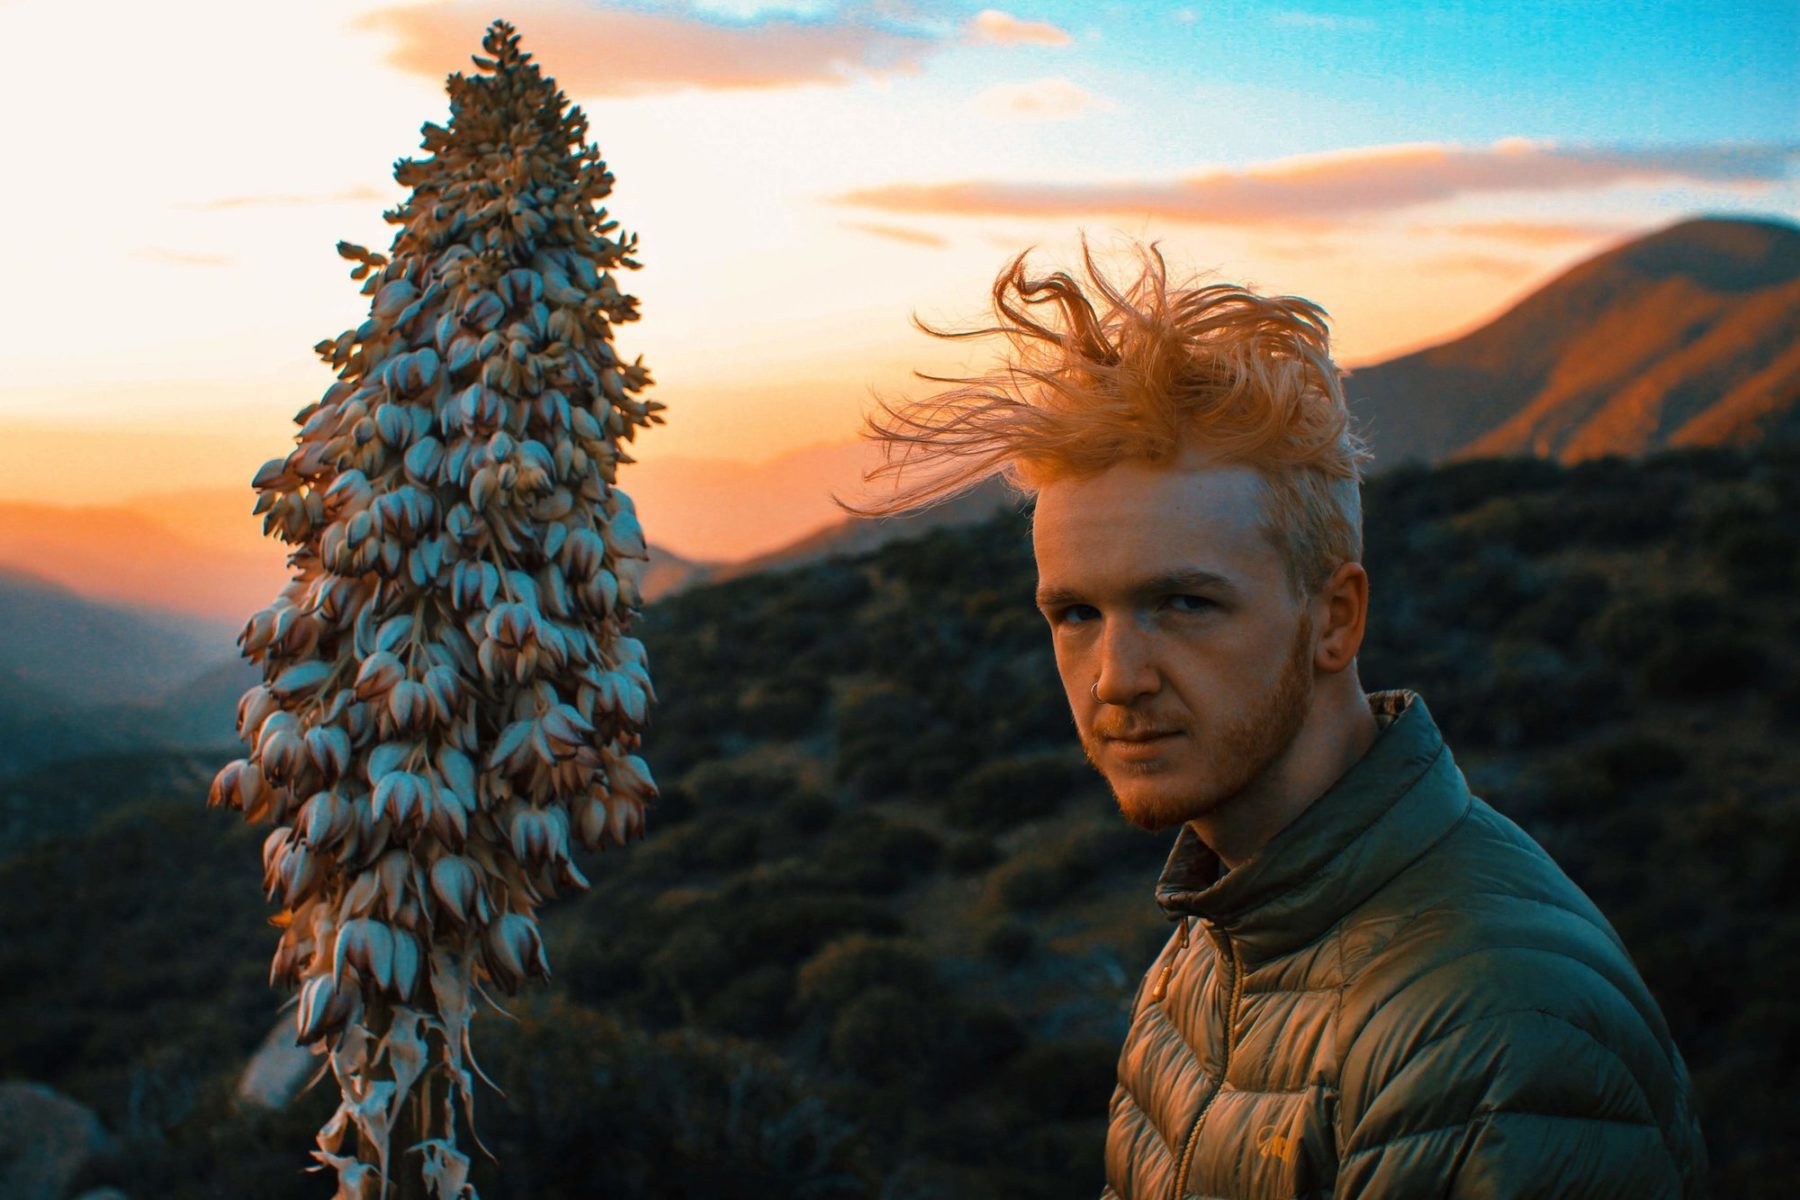 A man with pinkish colored hair stands in front of mountains at sunrise or sunset